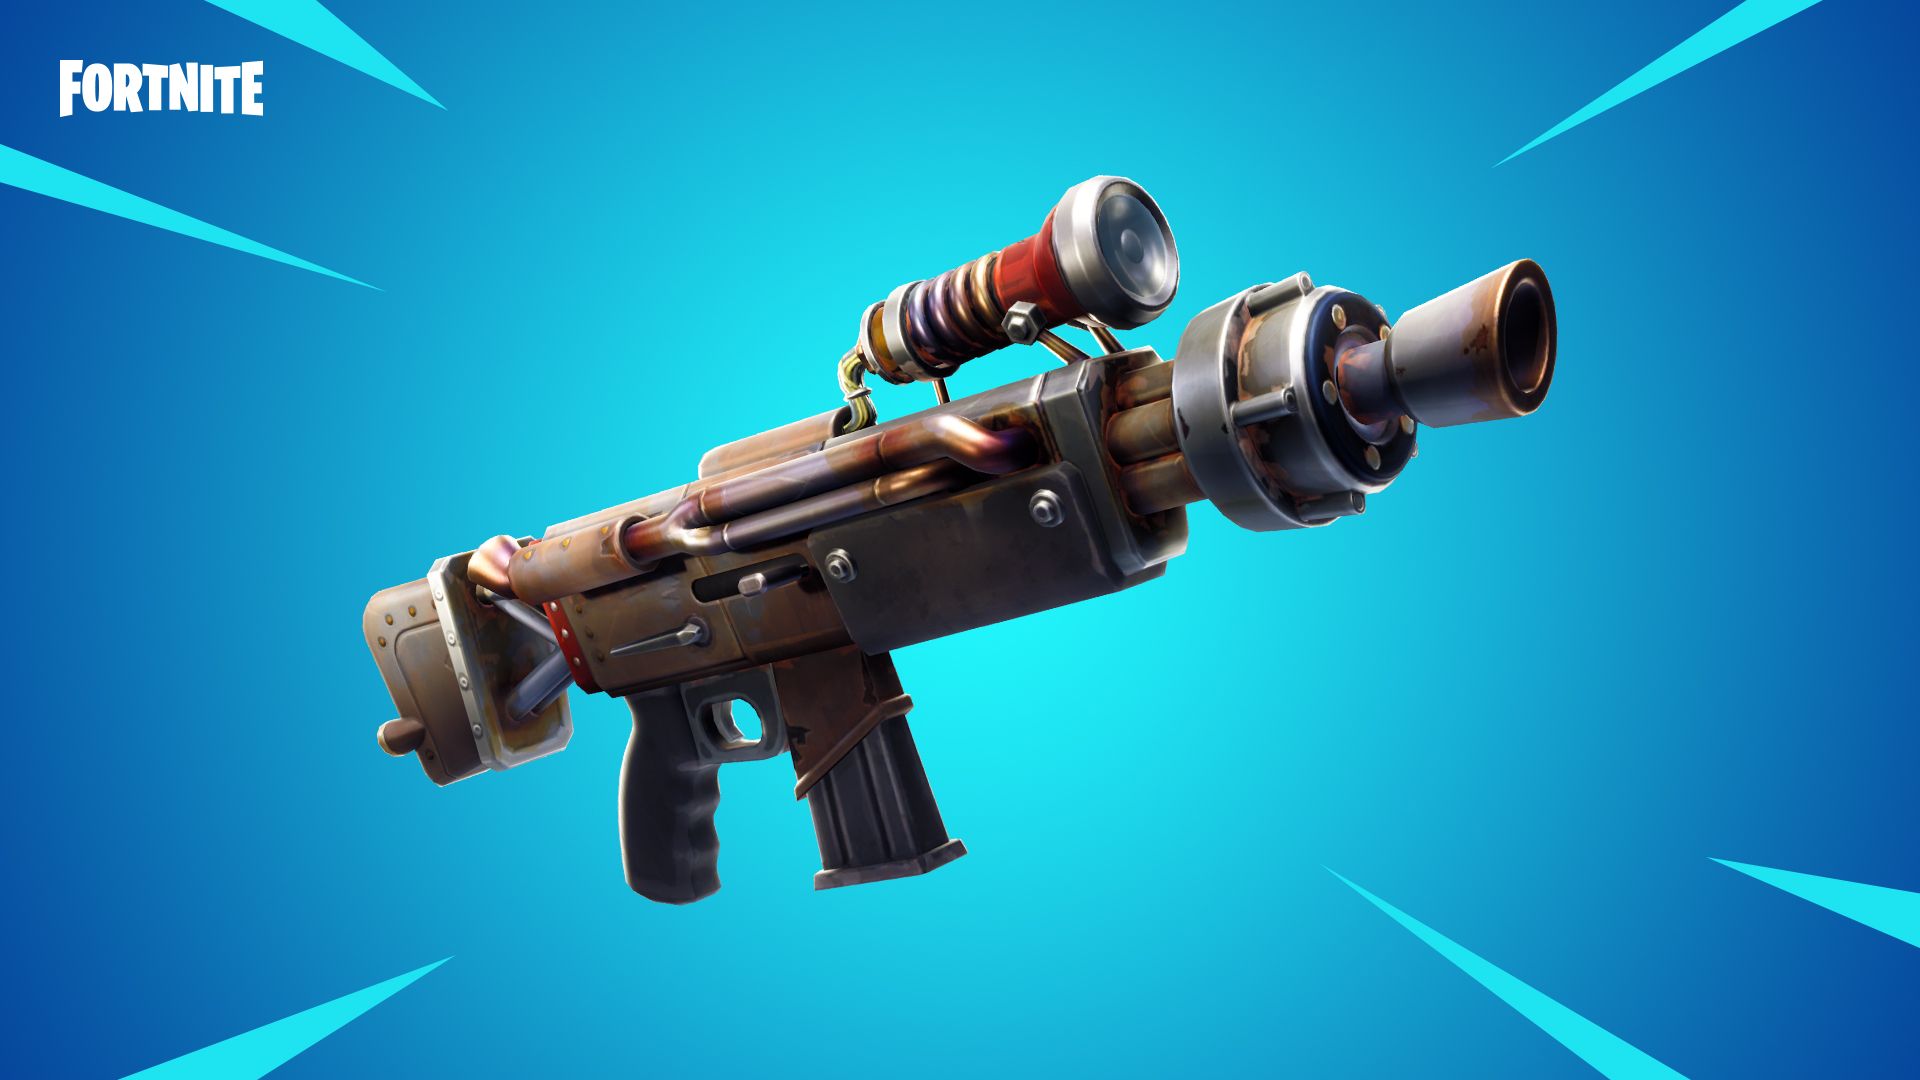 Fortnite: r discovers new hack that makes weapons shoot 10x faster